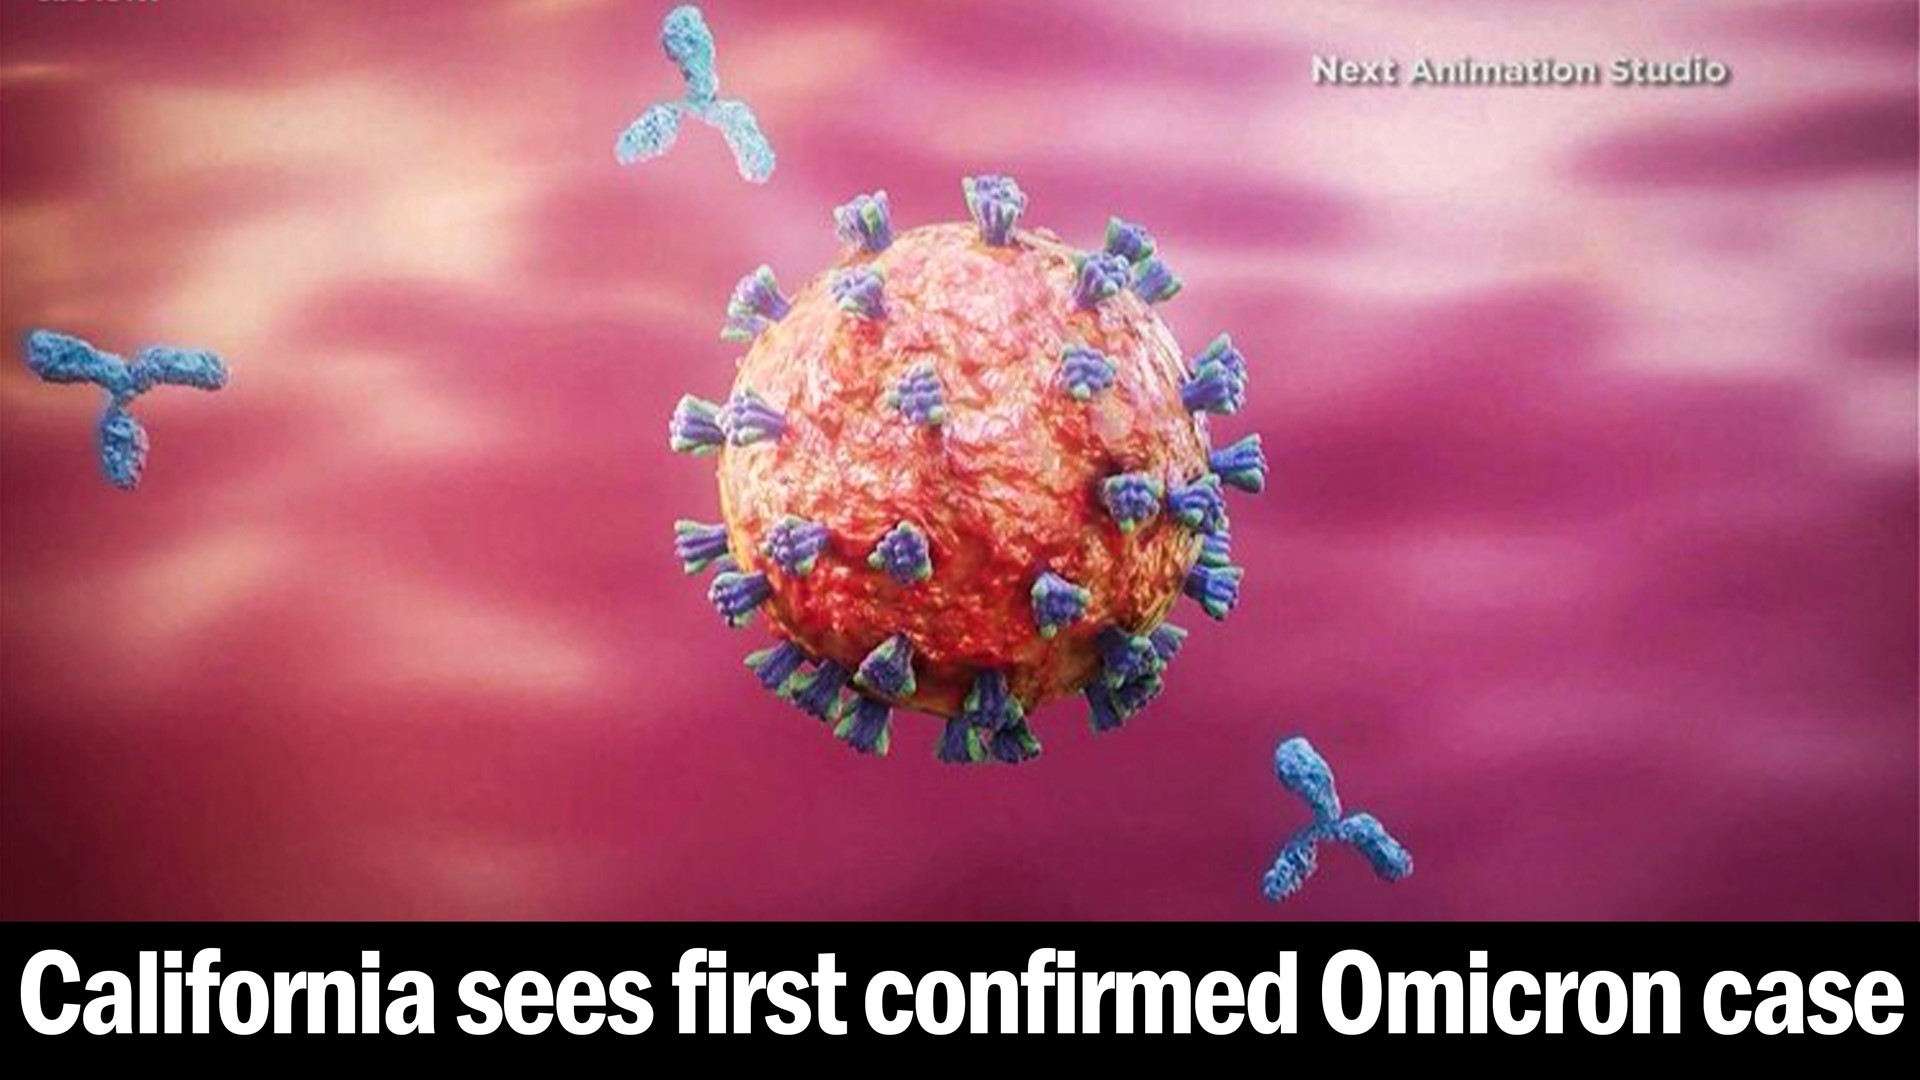 The news comes as scientists continue to study the risks posed by the new strain of the virus.